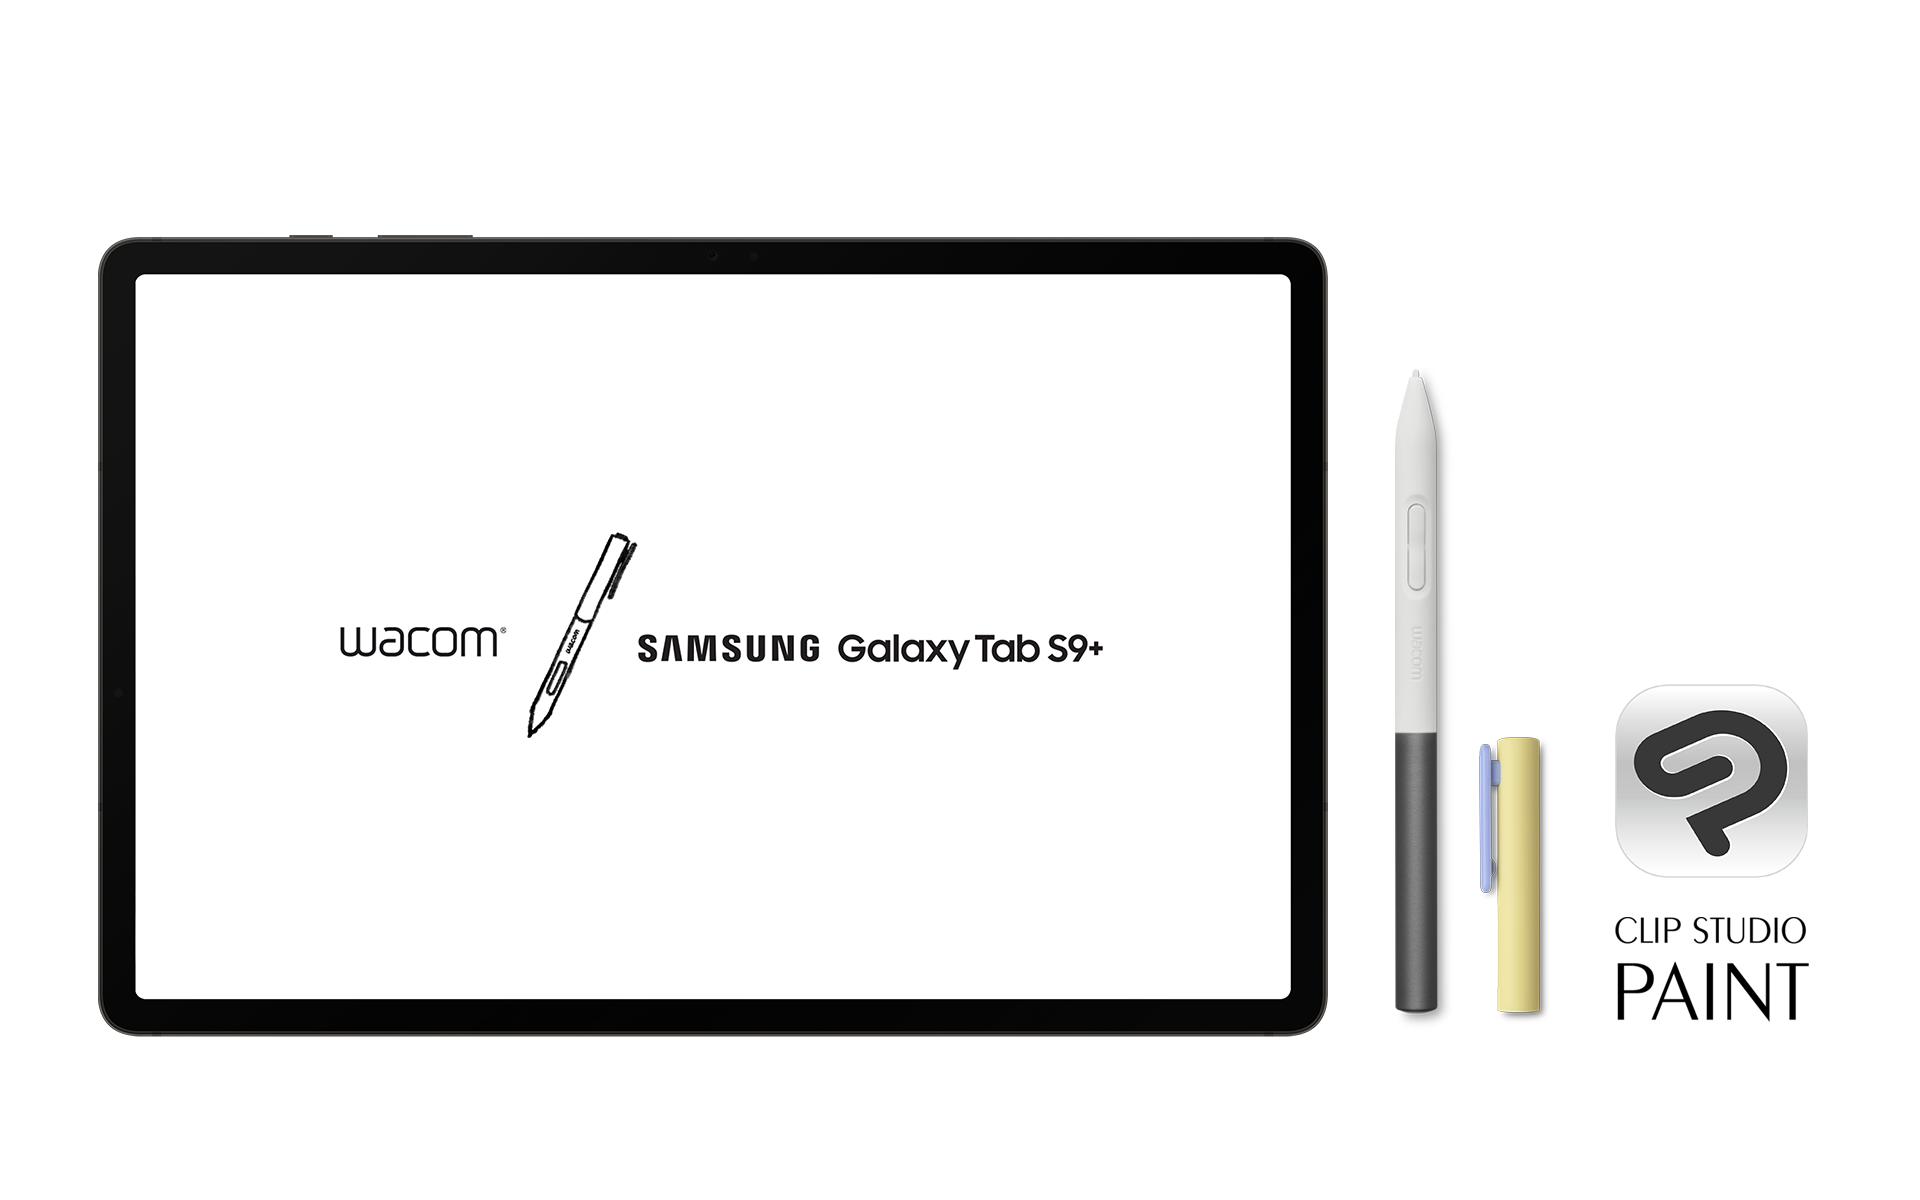 Clip Studio Paint, Samsung Galaxy Tab S9+, and Wacom Pen offered together in new student product “Wacom Mobile Creative Edition” released by Wacom Korea　An optimal learning environment with Wacom&#039;s digital pen technology and a simple interface